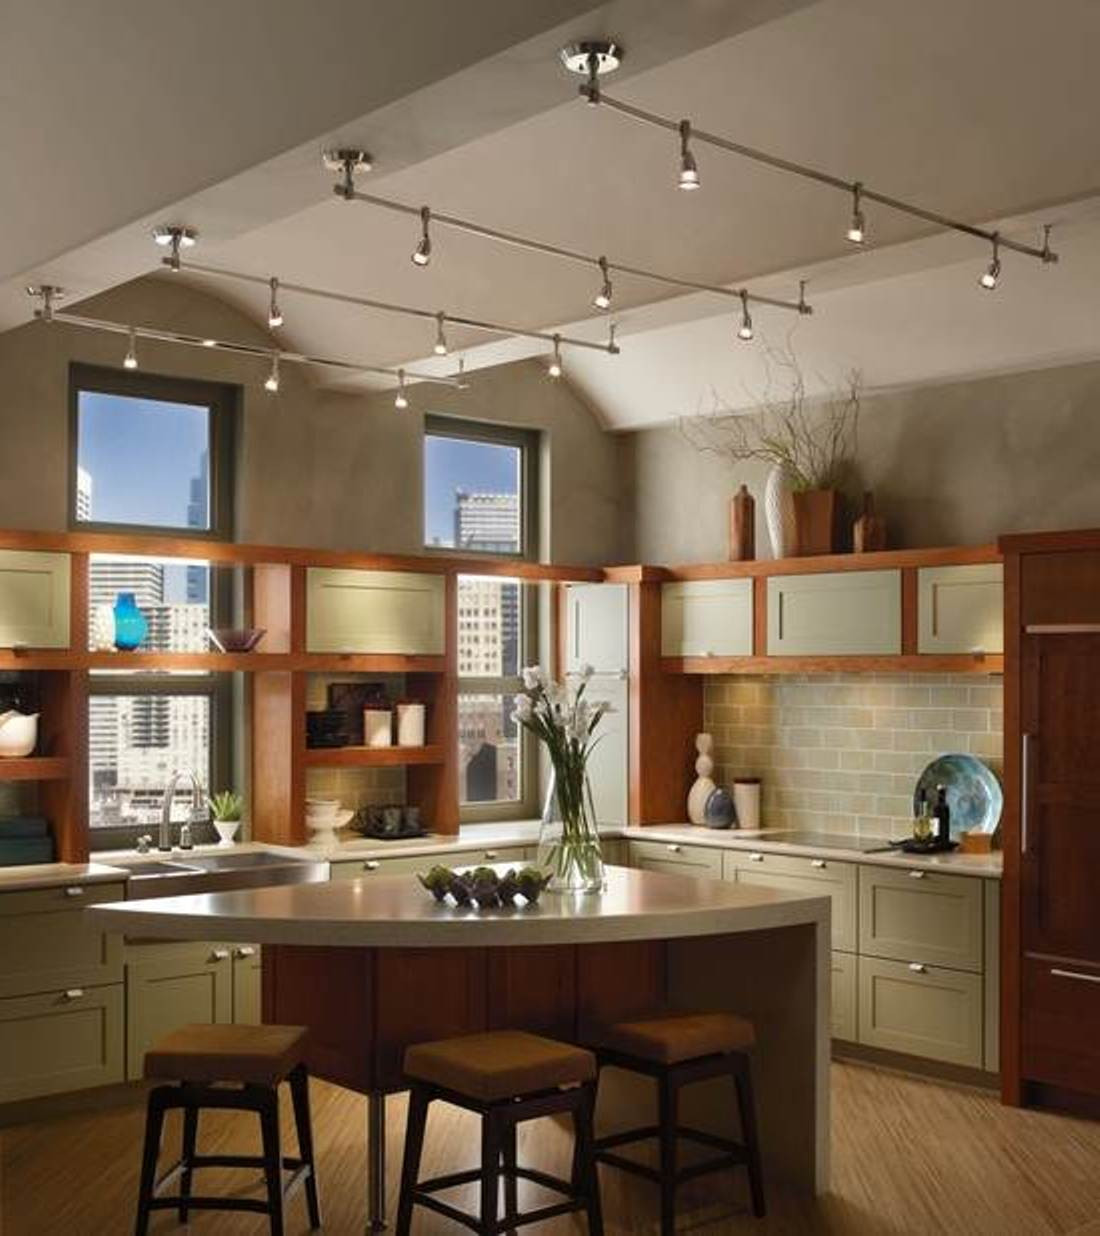 Kitchen Tracking Lights
 Different Types of Track Lighting Fixtures to Install